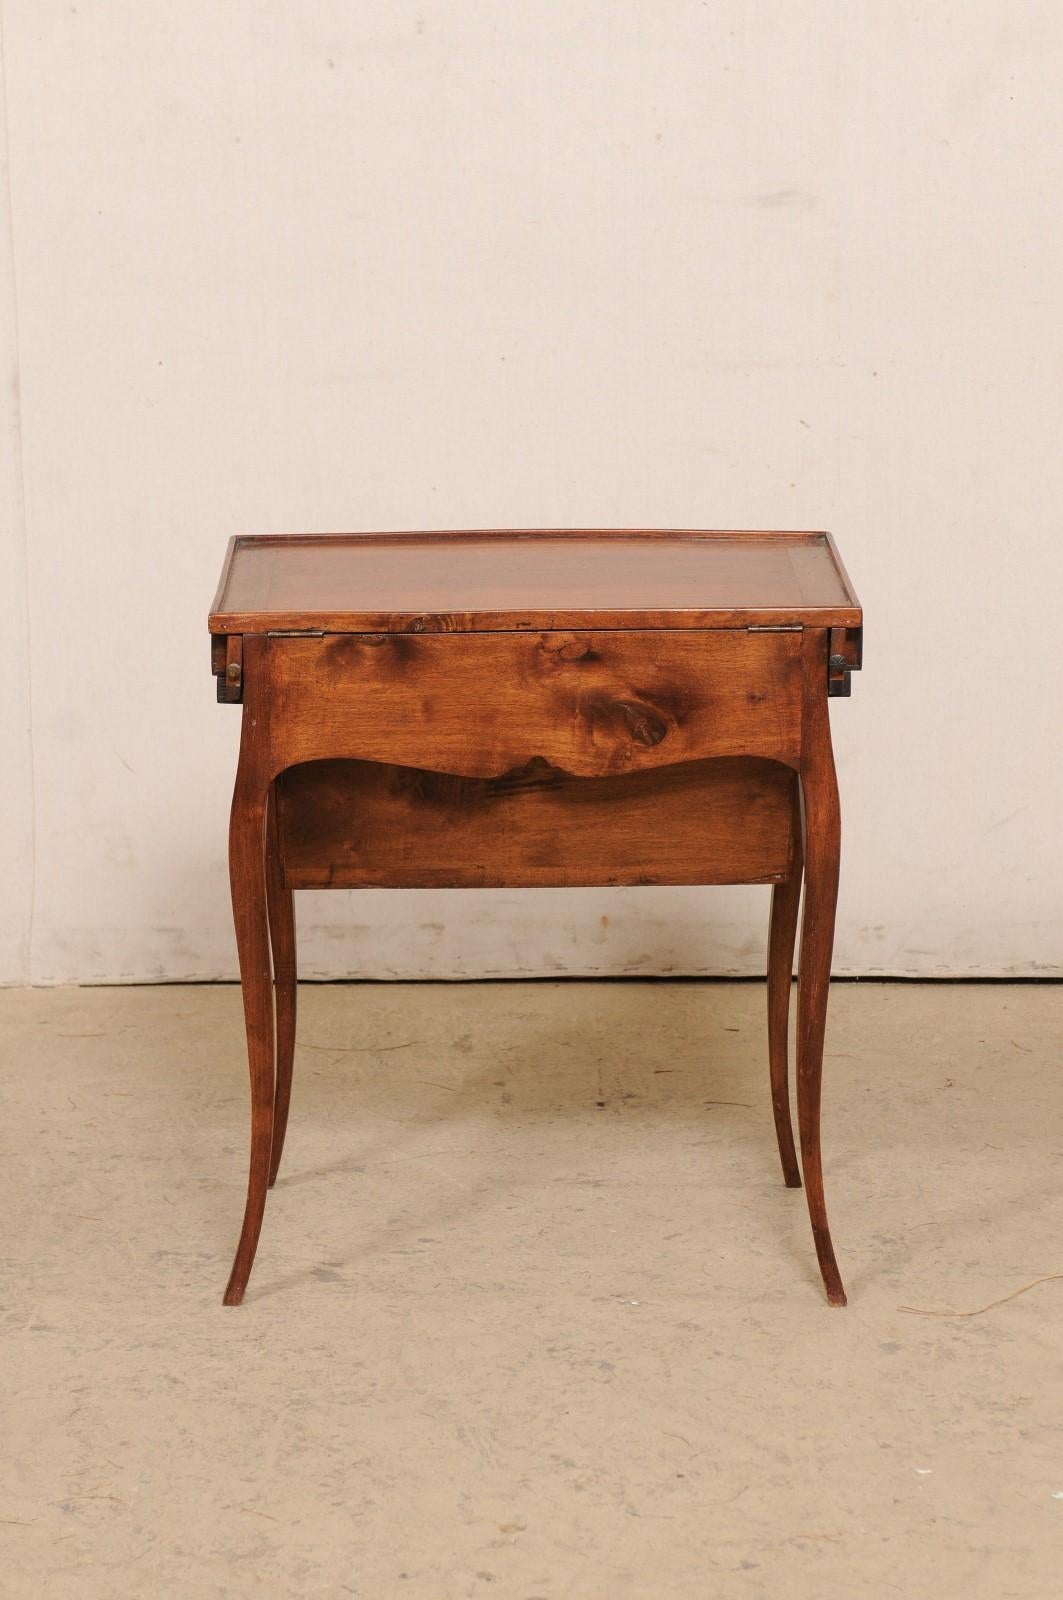 Wood French 19th C. Table w/ Unusual & Creative Drop Down Storage-Great for Crafting